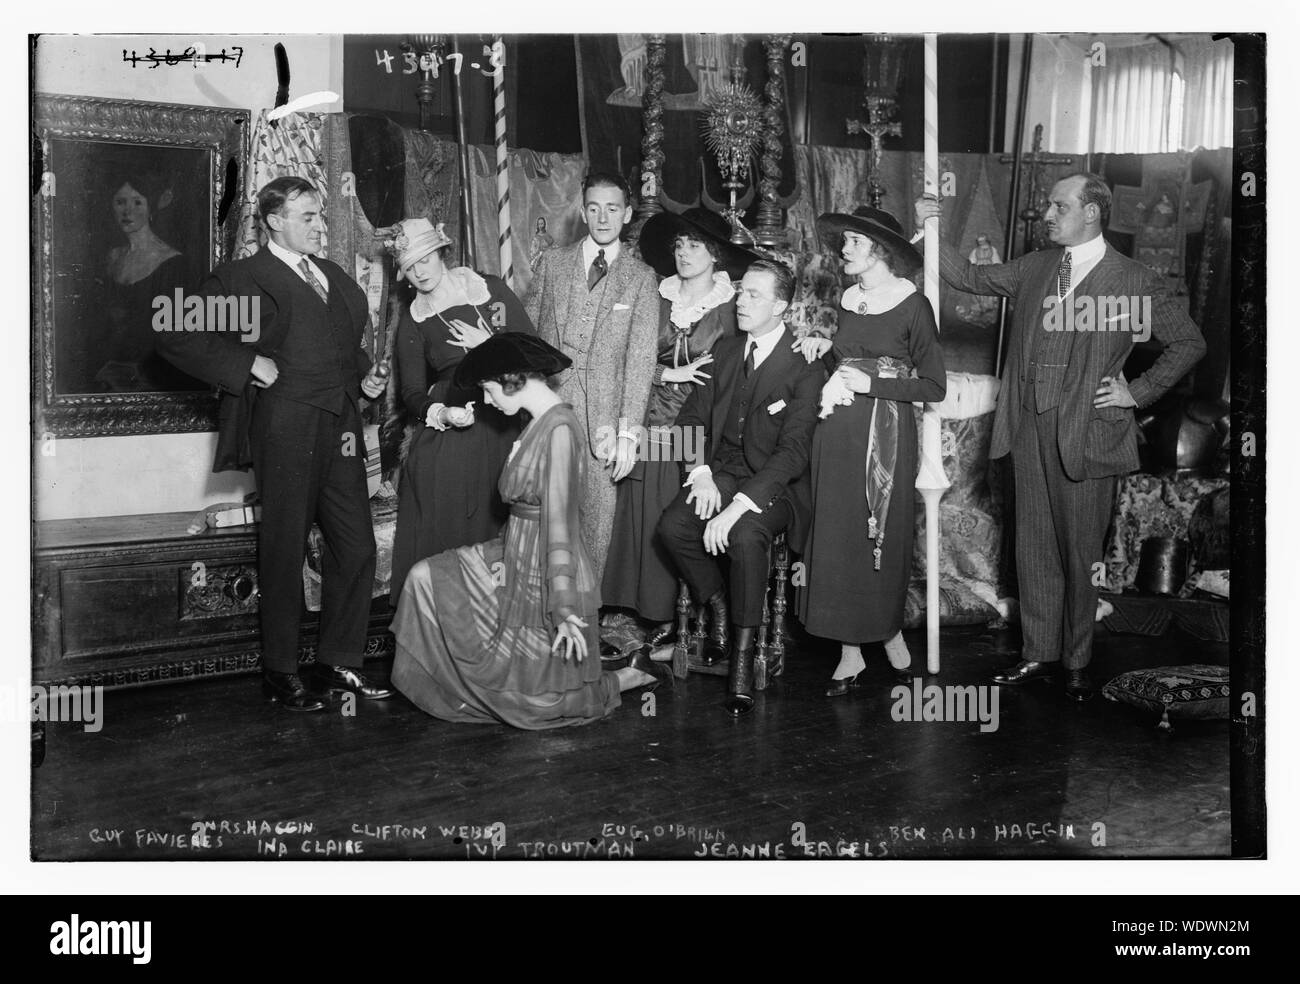 Guy Favieres, Ina Claire, Ivy Troutman, Jeanne Eagels, Mrs. Haggin, Clifton Webb, Eug. O'Brien, Ben Ali Haggin Abstract/medium: 1 negative : glass  5 x 7 in. or smaller. Stock Photo